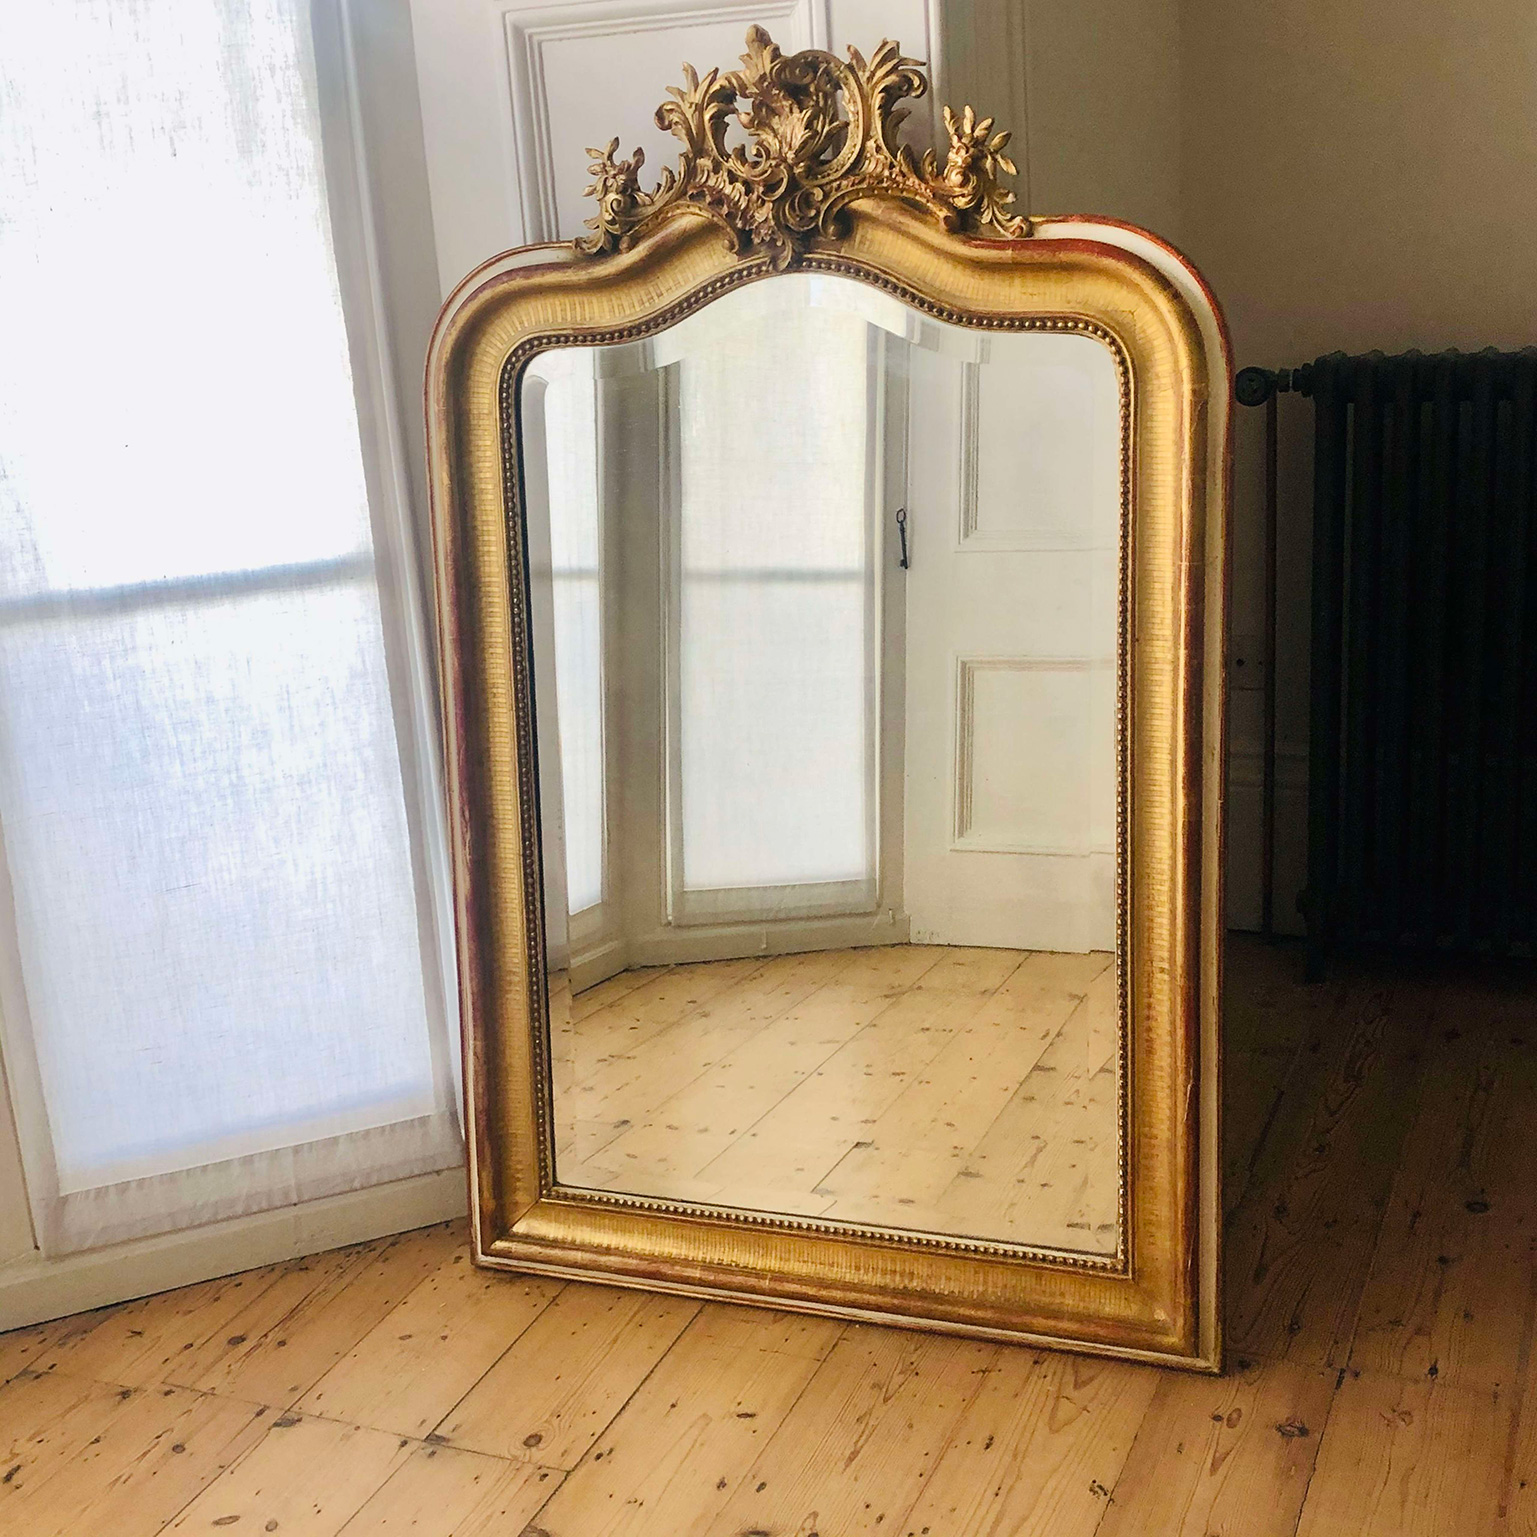 19th century antique French Louis XV gilt mirror - bevelled glass